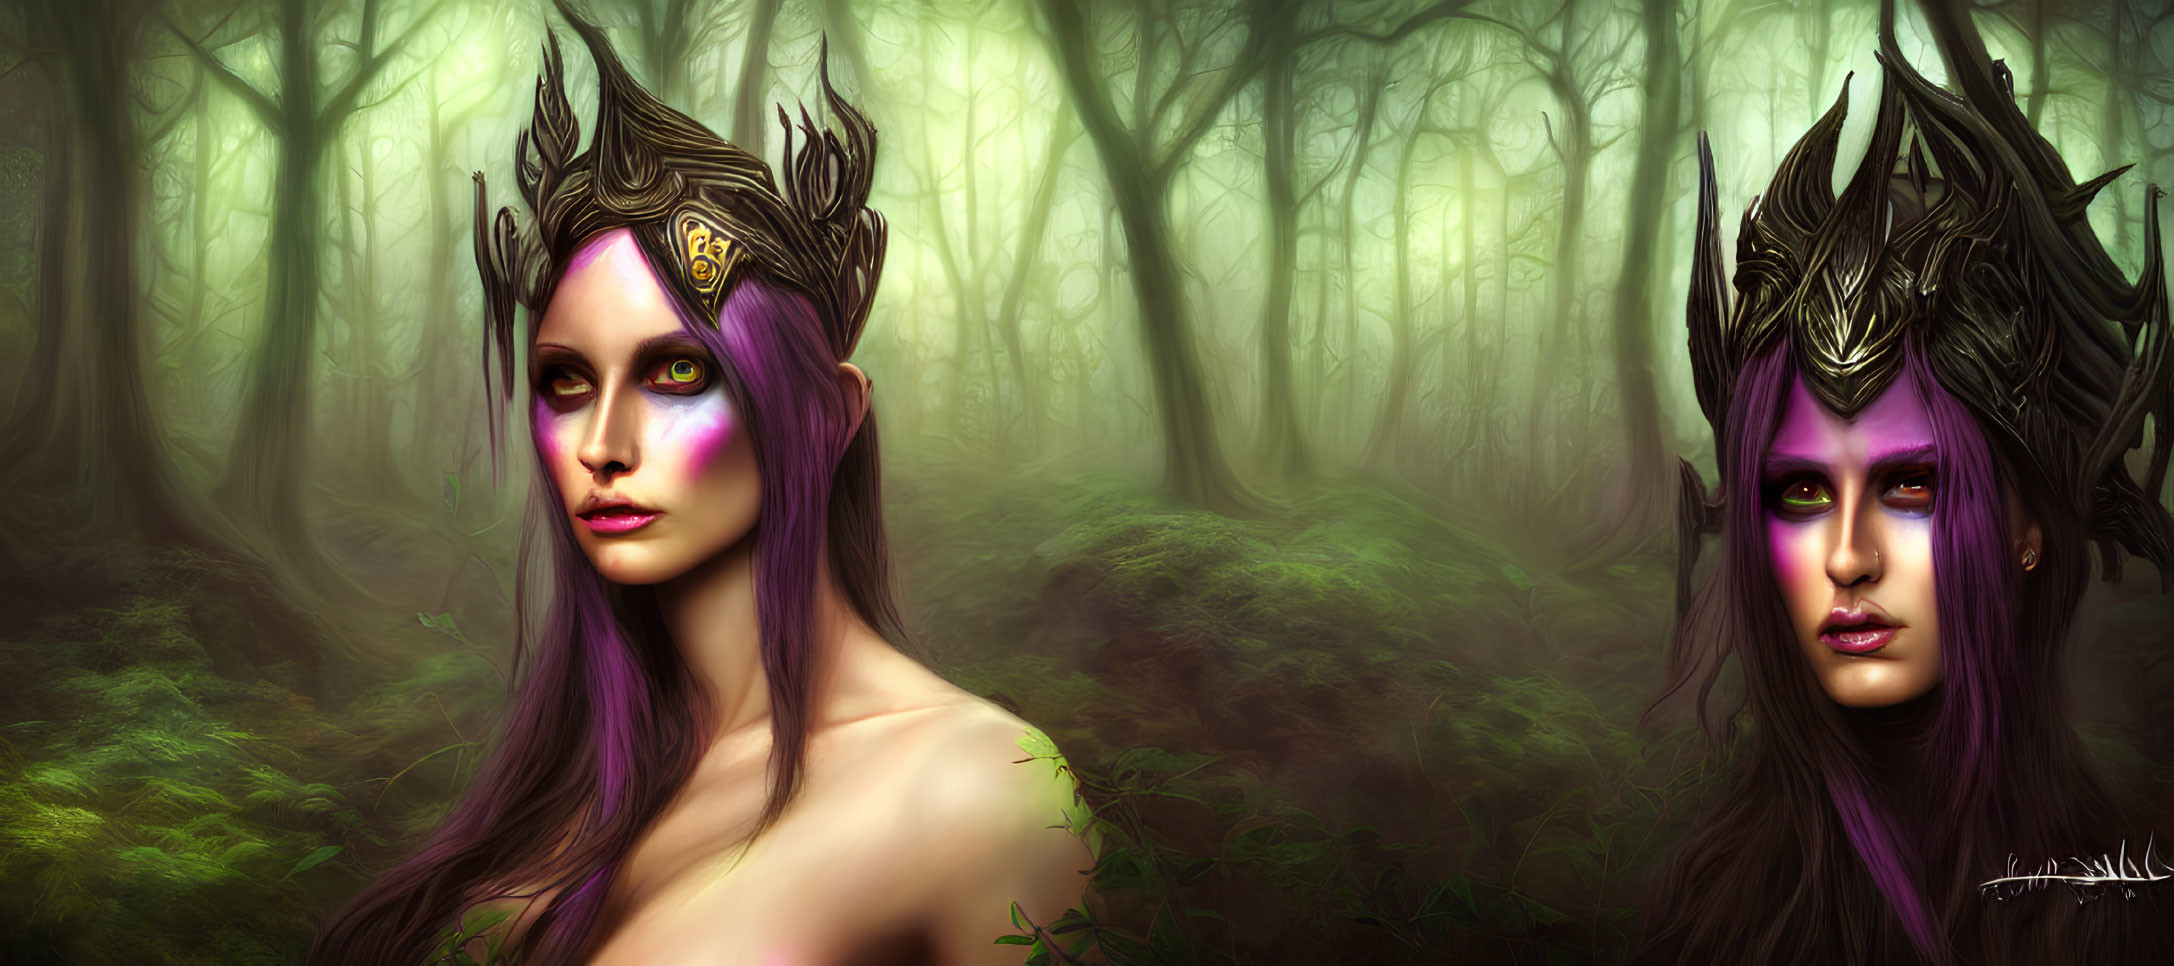 Mystical women with purple hair and ornate crowns in foggy forest